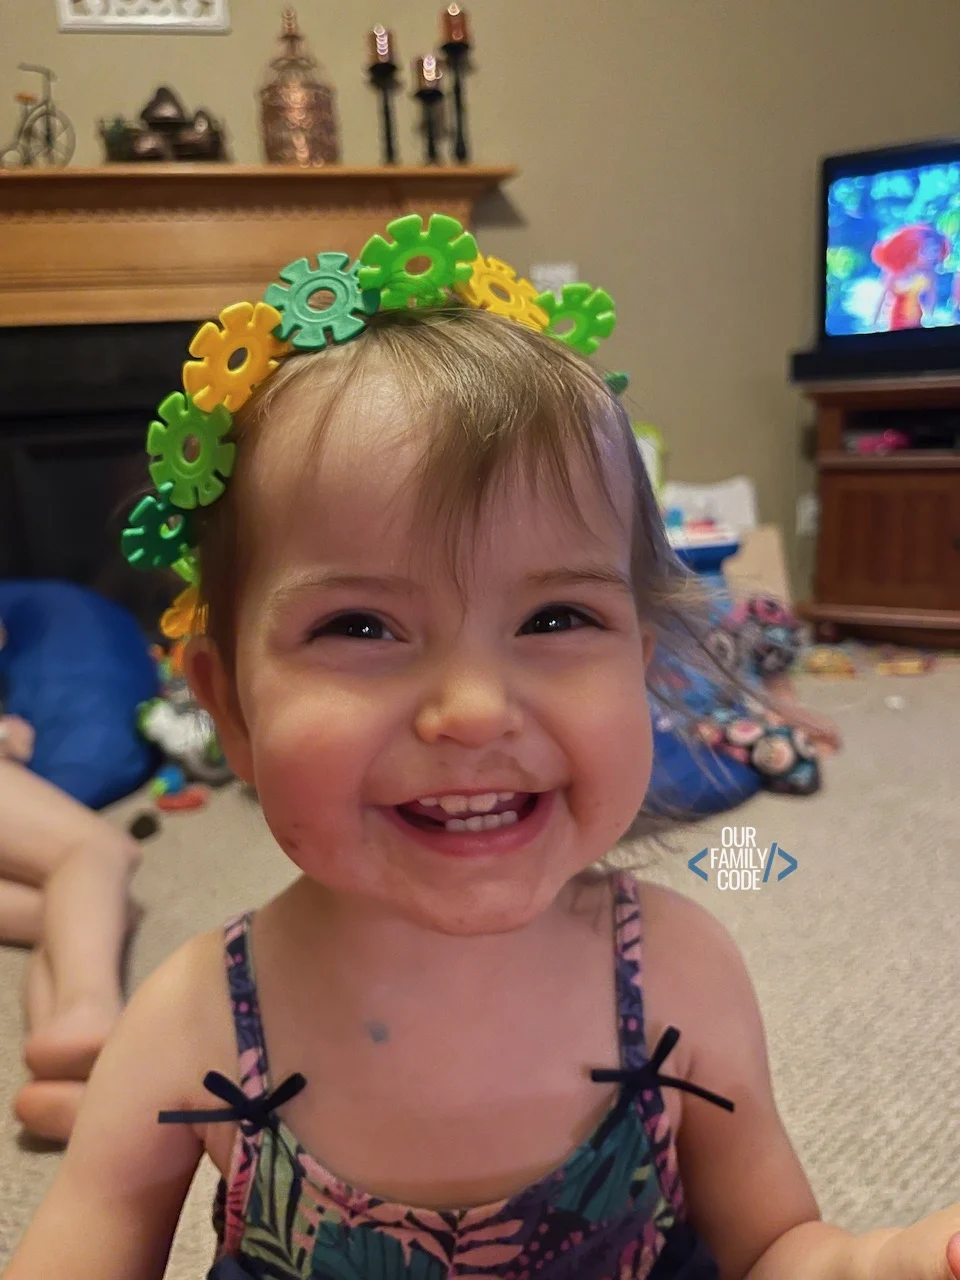 A toddler with a chocolate face and brain flakes crown.